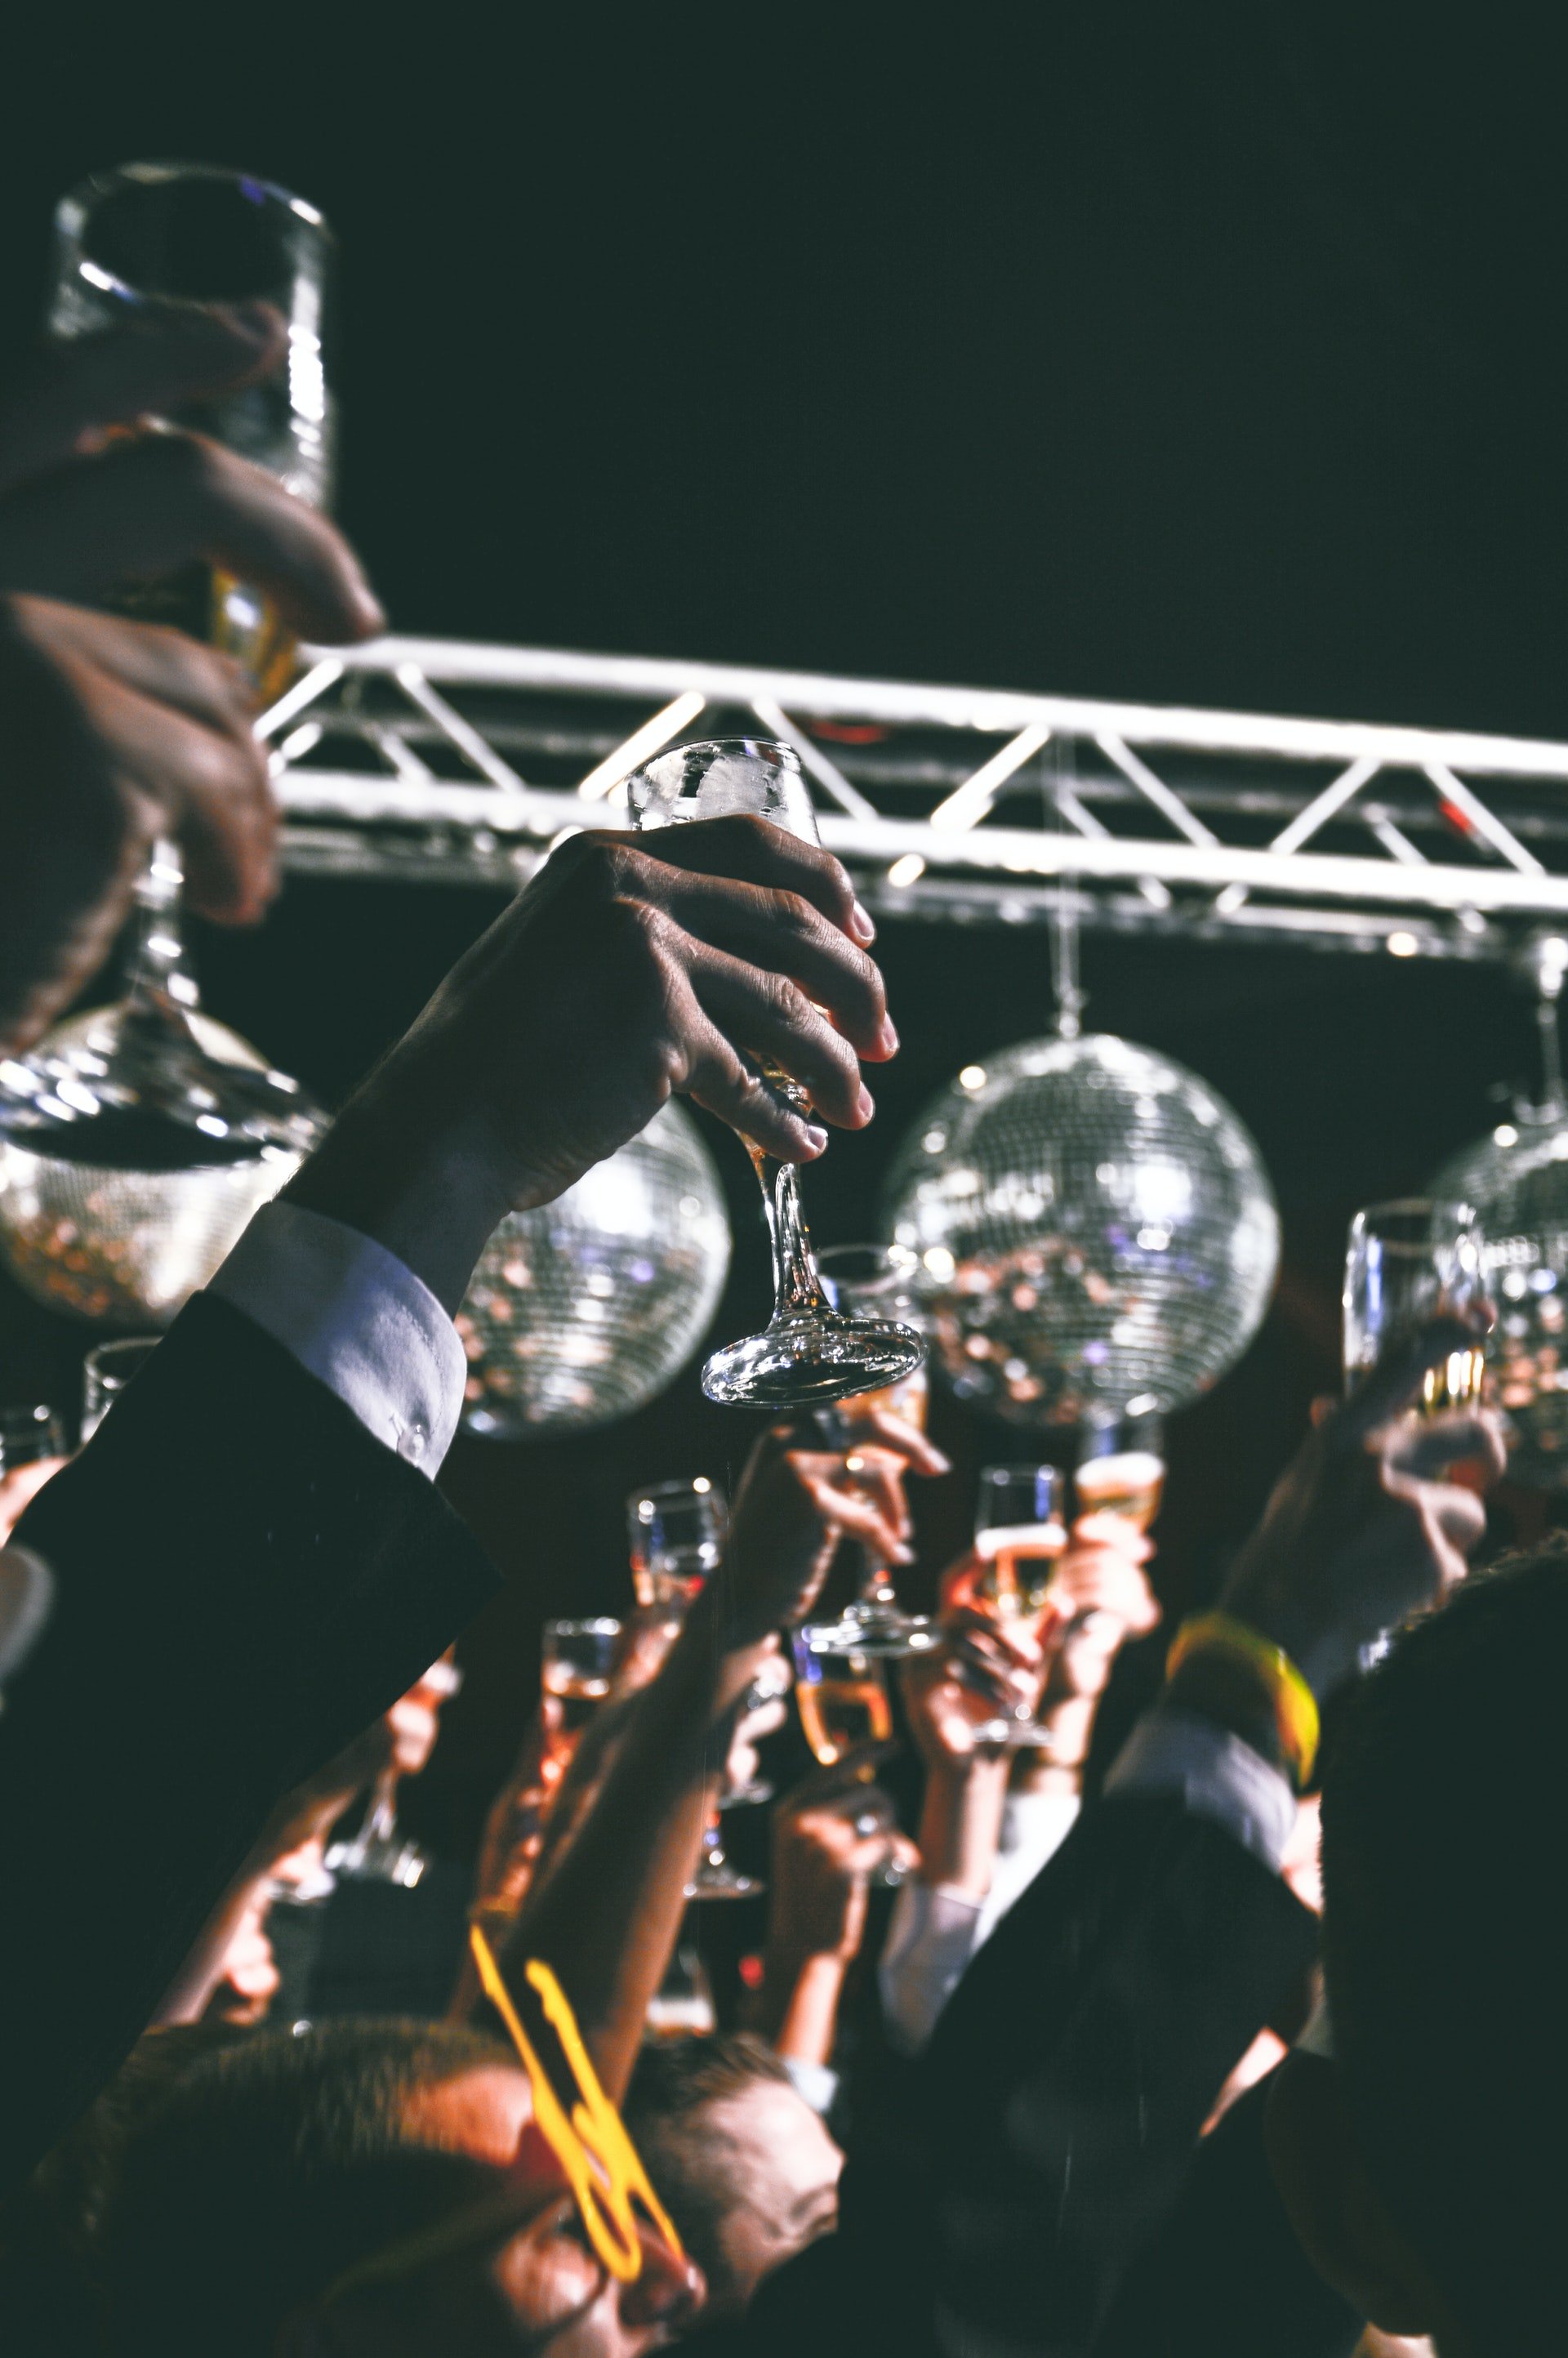 Photo of a party | Photo: Pexels